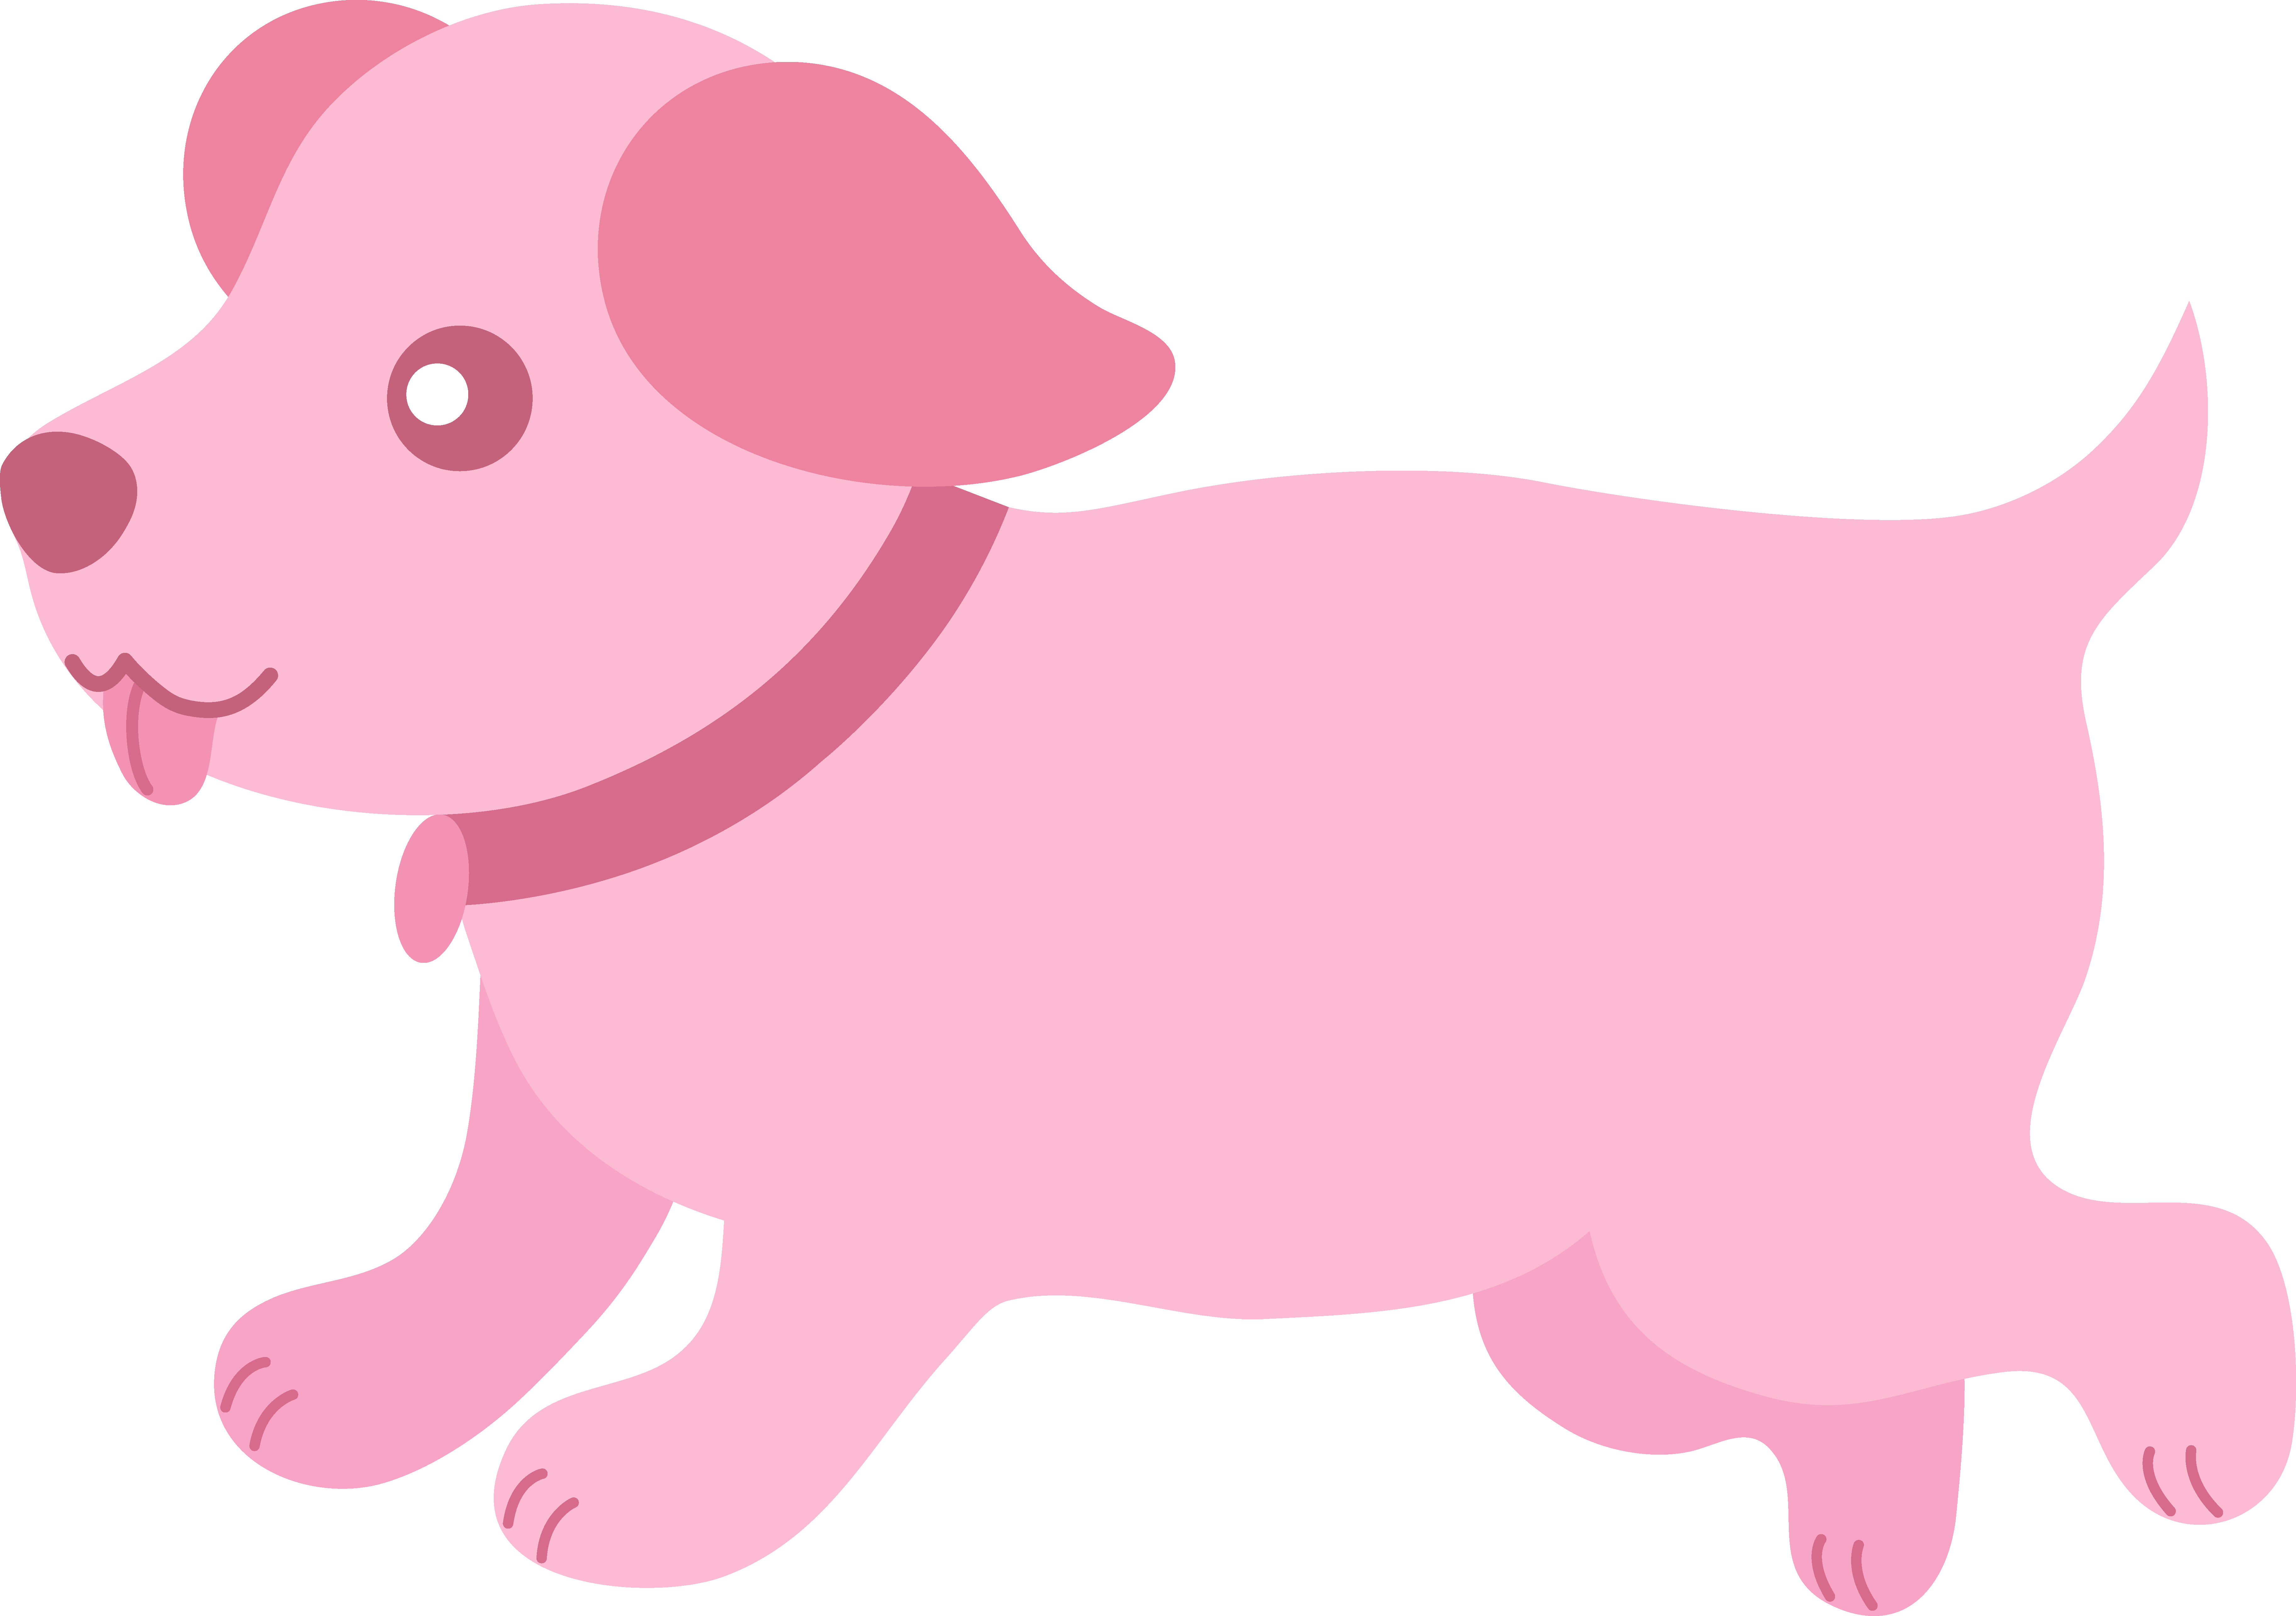 Cute dog with pink clipart